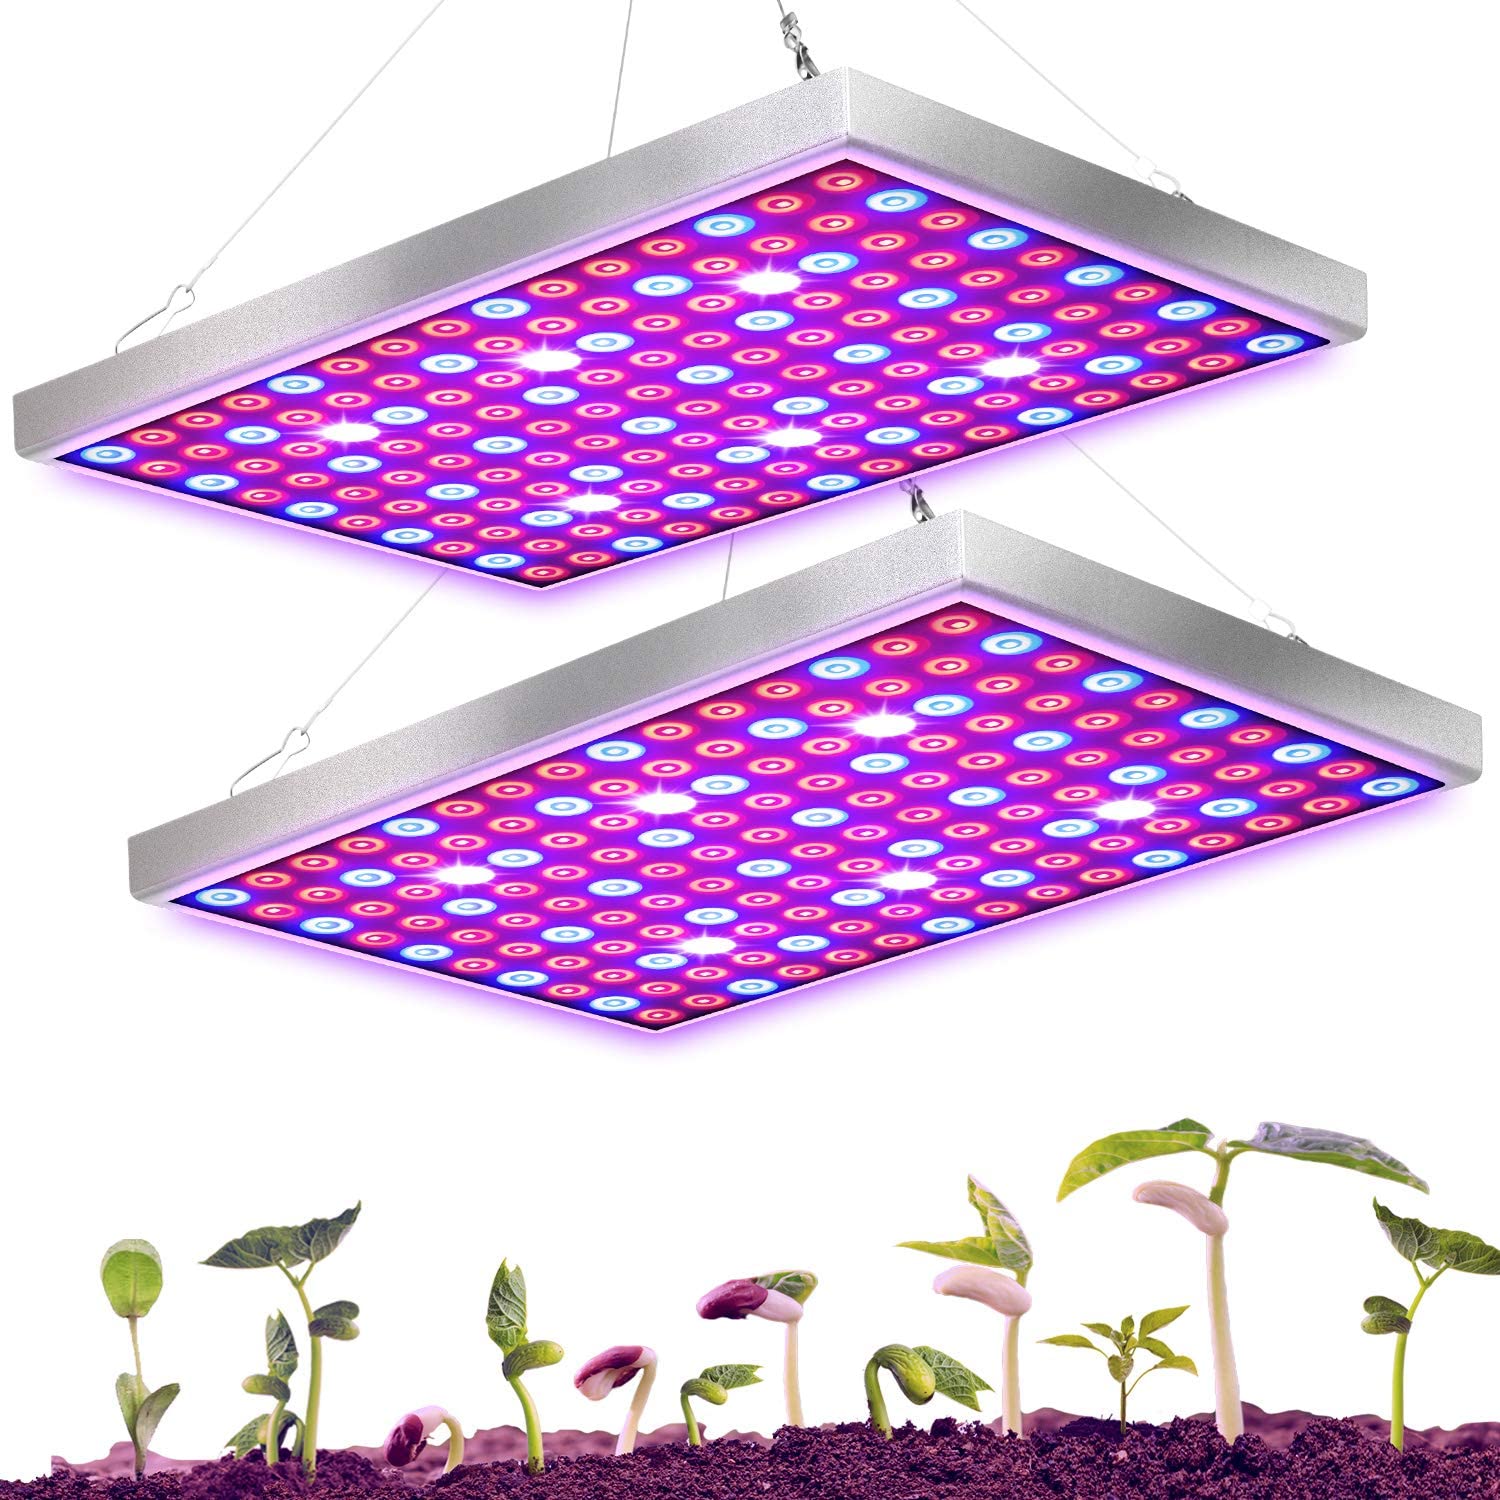 LED Grow Light for Indoor Plan